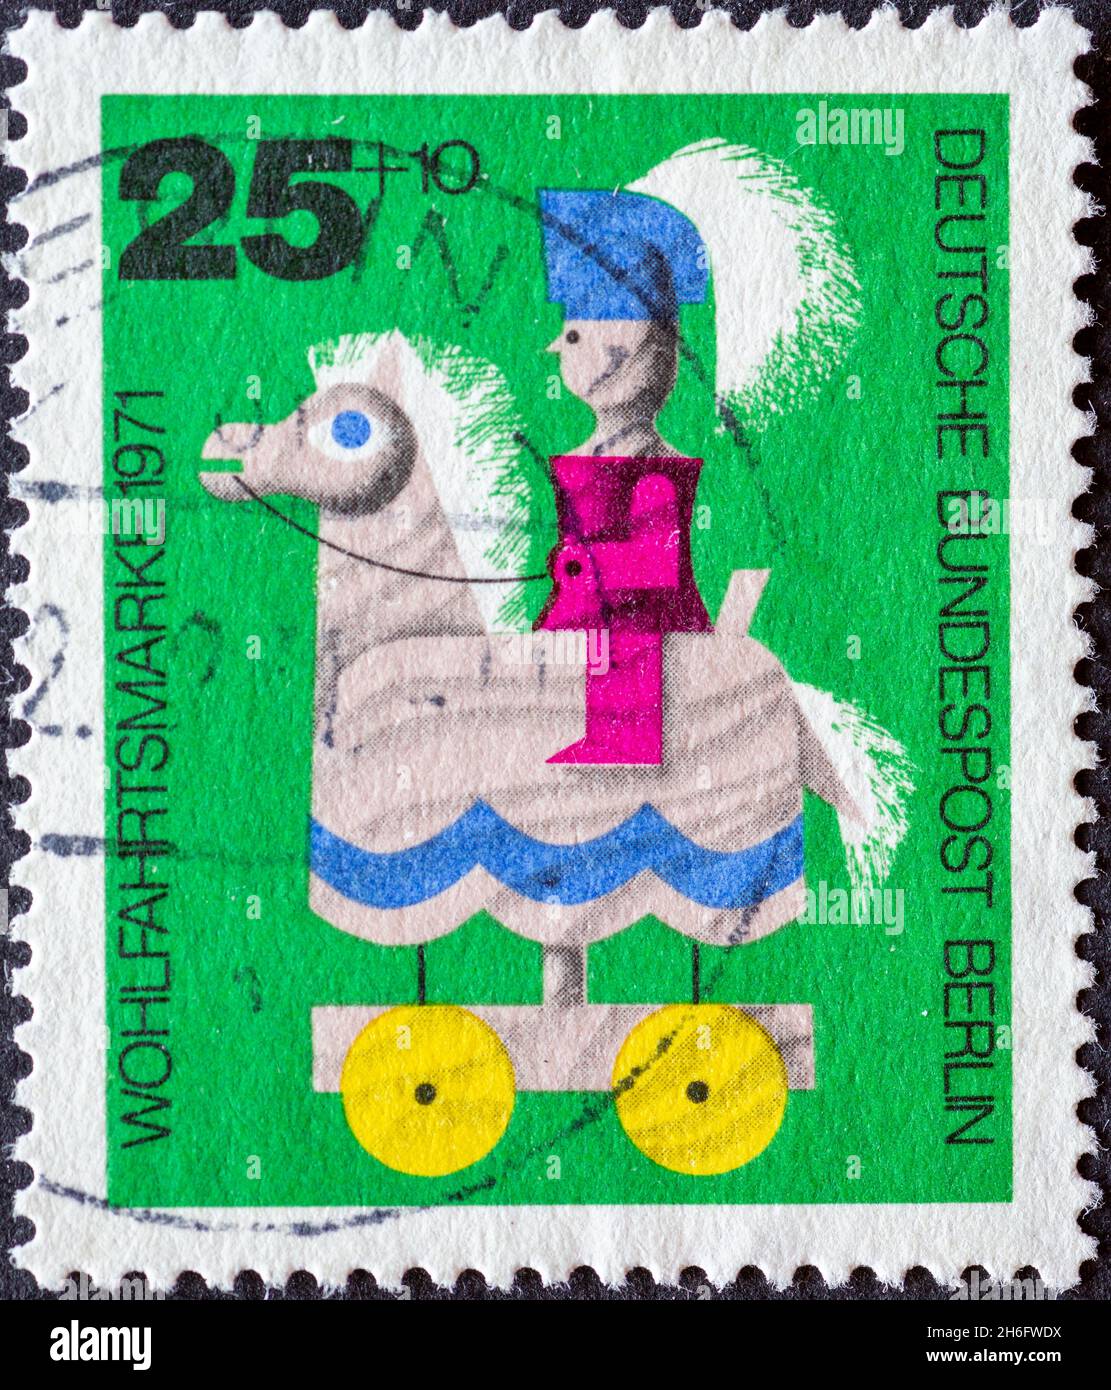 GERMANY, Berlin - CIRCA 1971: a postage stamp from Germany, Berlin showing a 1971 charity postal stamp with old wooden toys. Here: knight on horseback Stock Photo